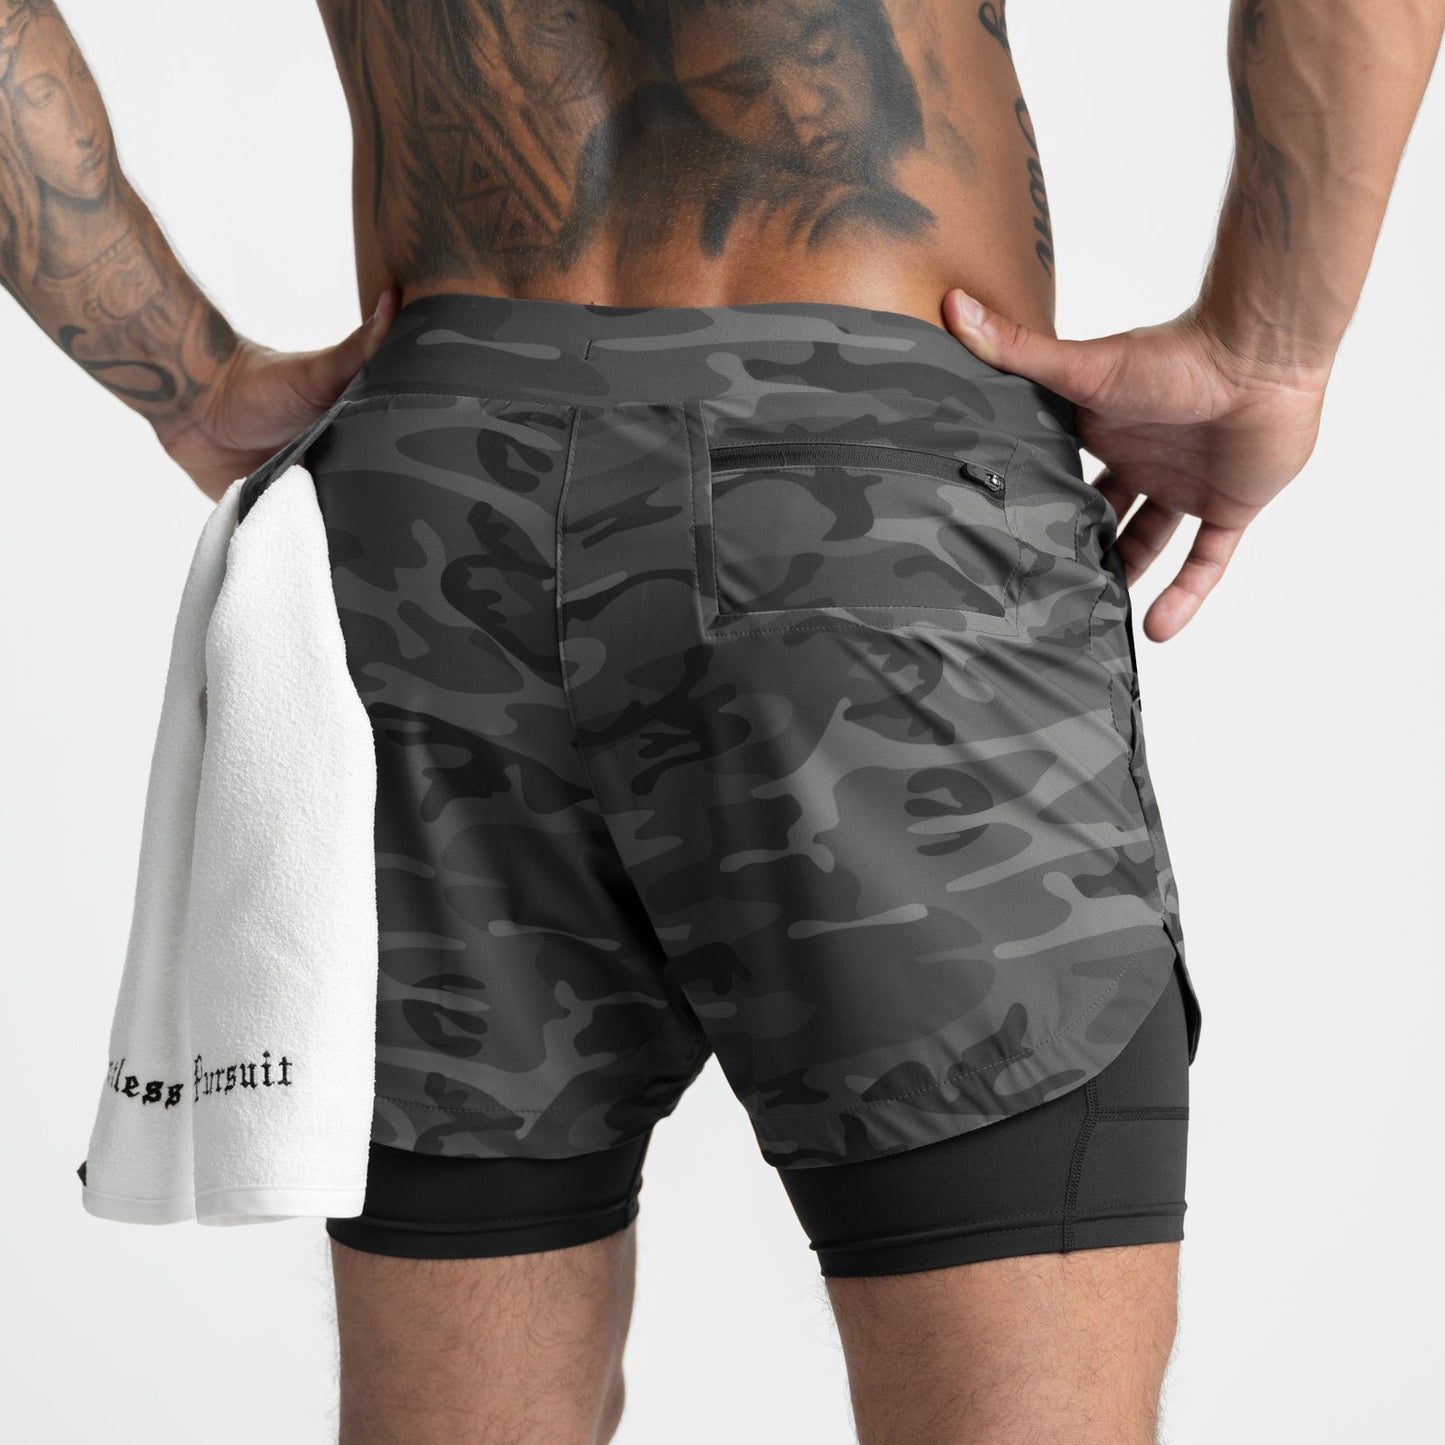 Outdoor Fitness Stretch Breathable Double Layer Men's Shorts